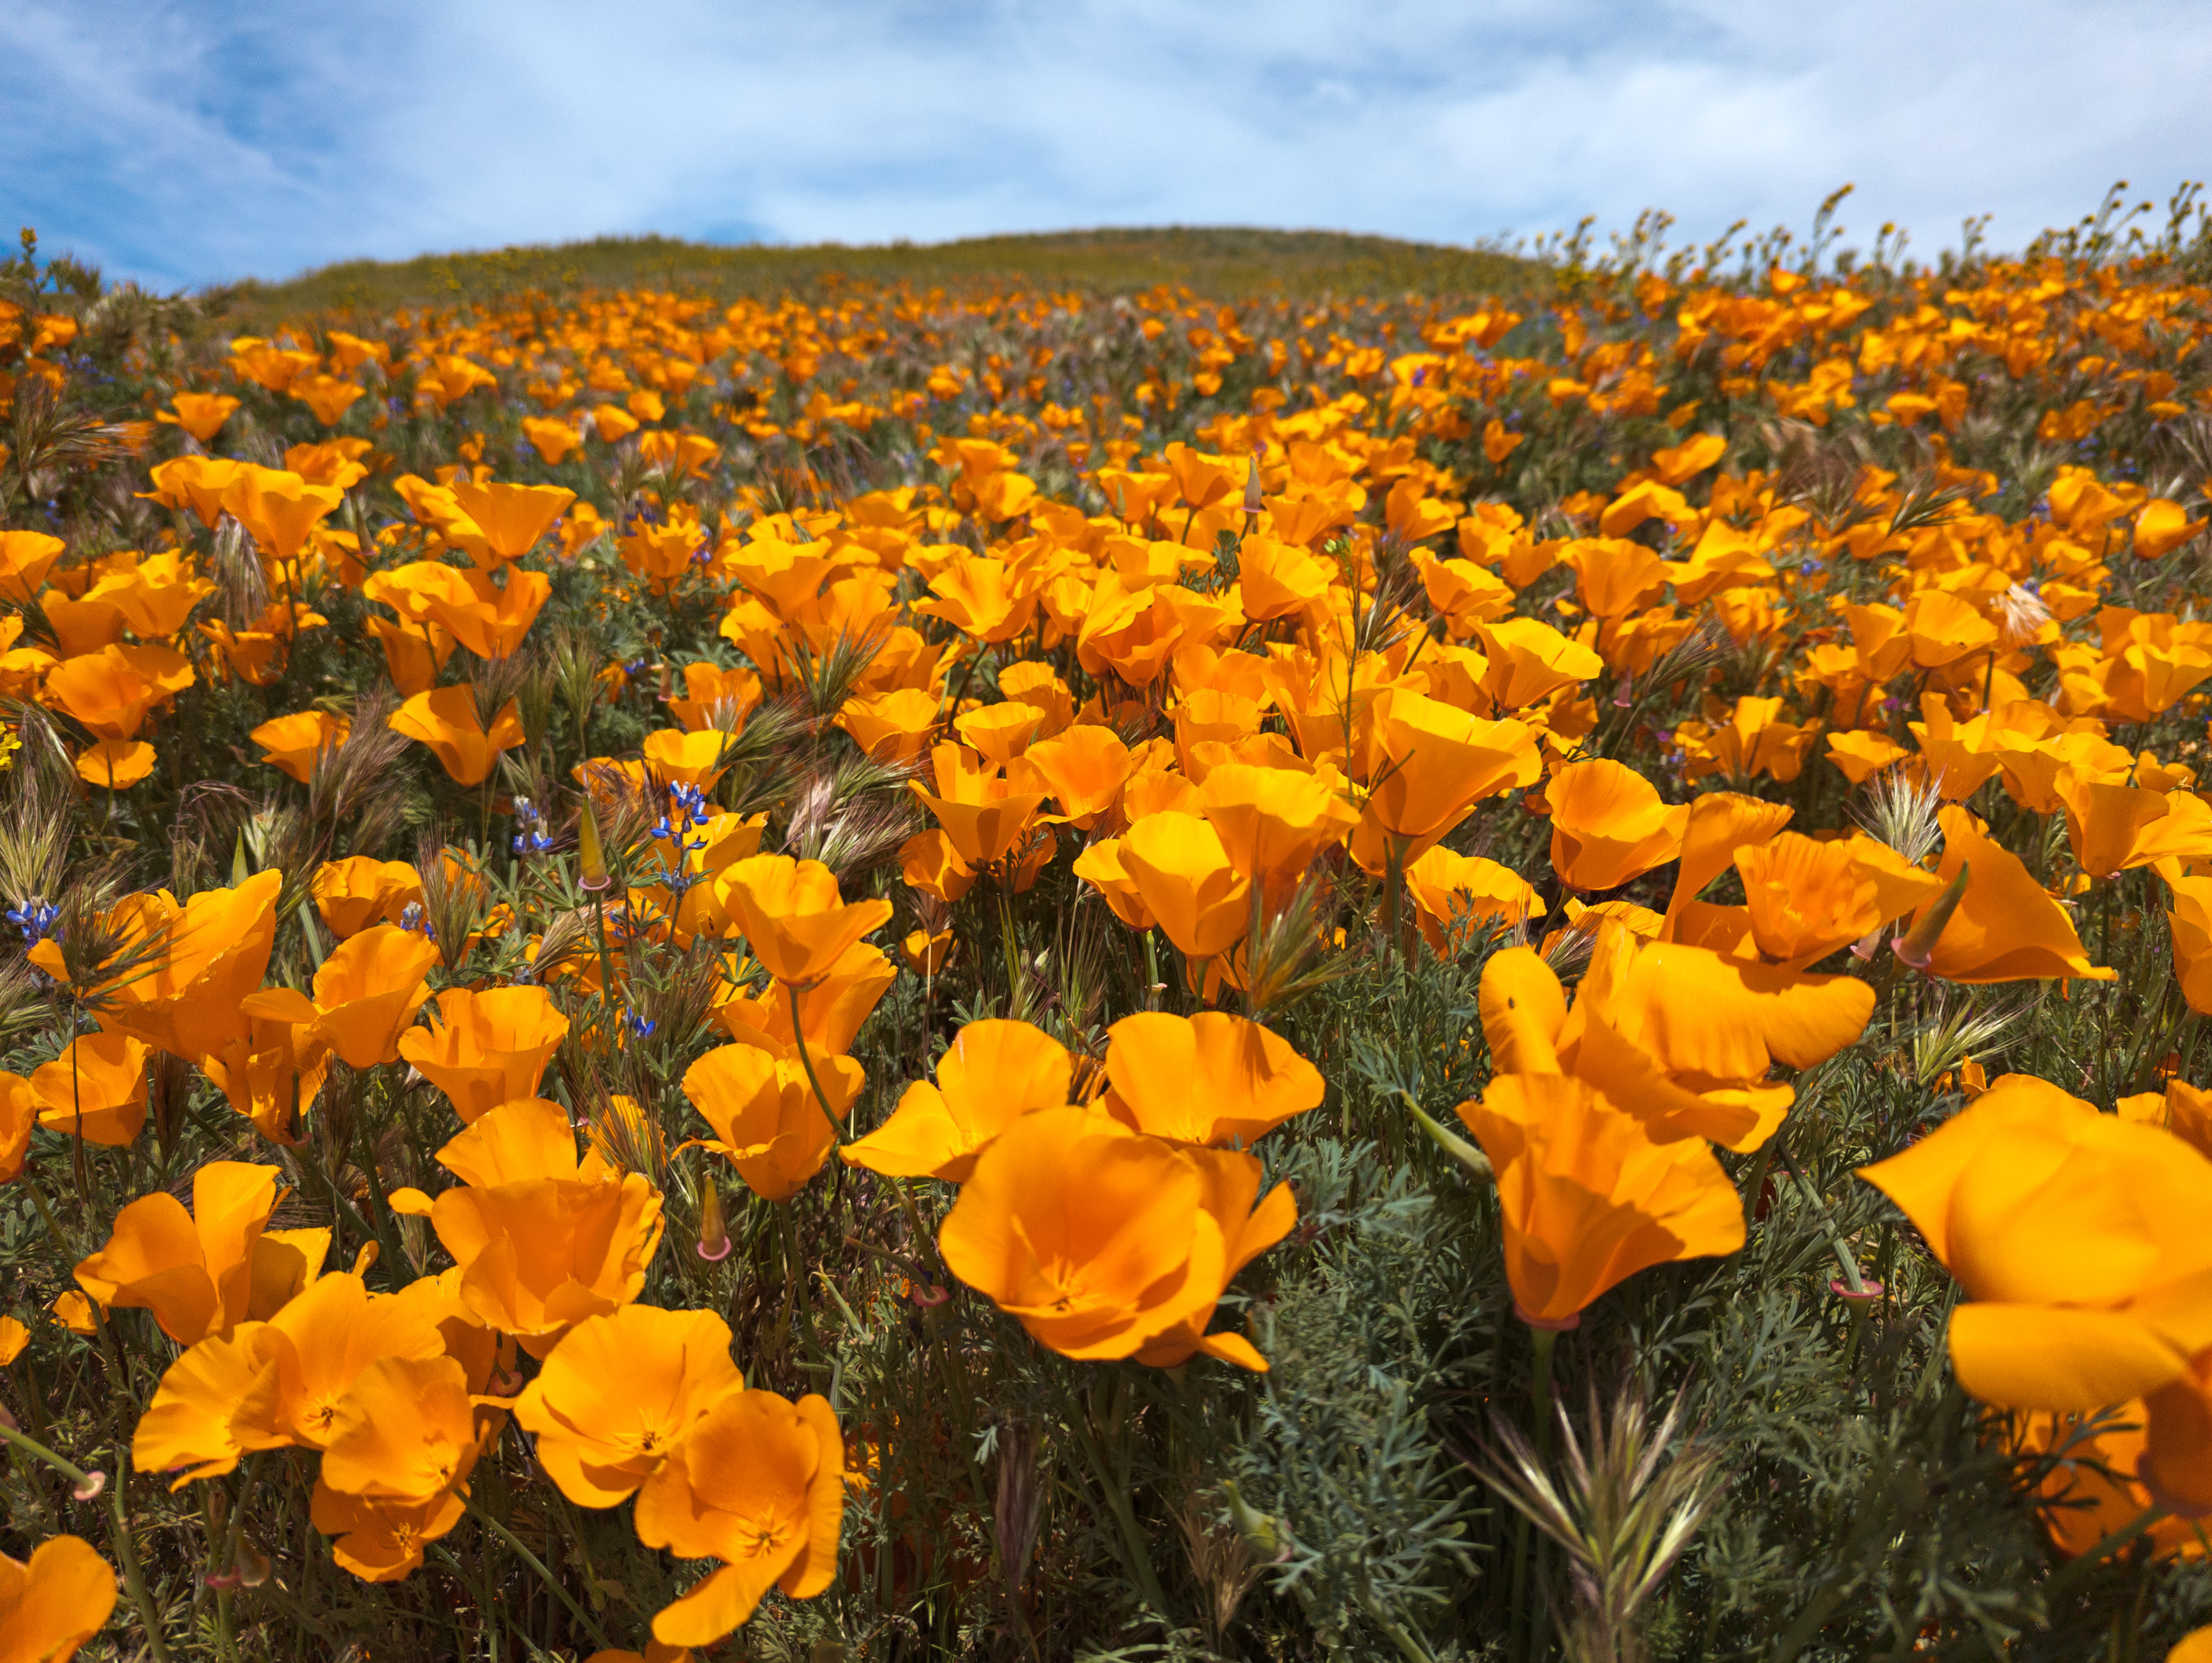 I have a California poppy on my rib cage below my bra line, and I